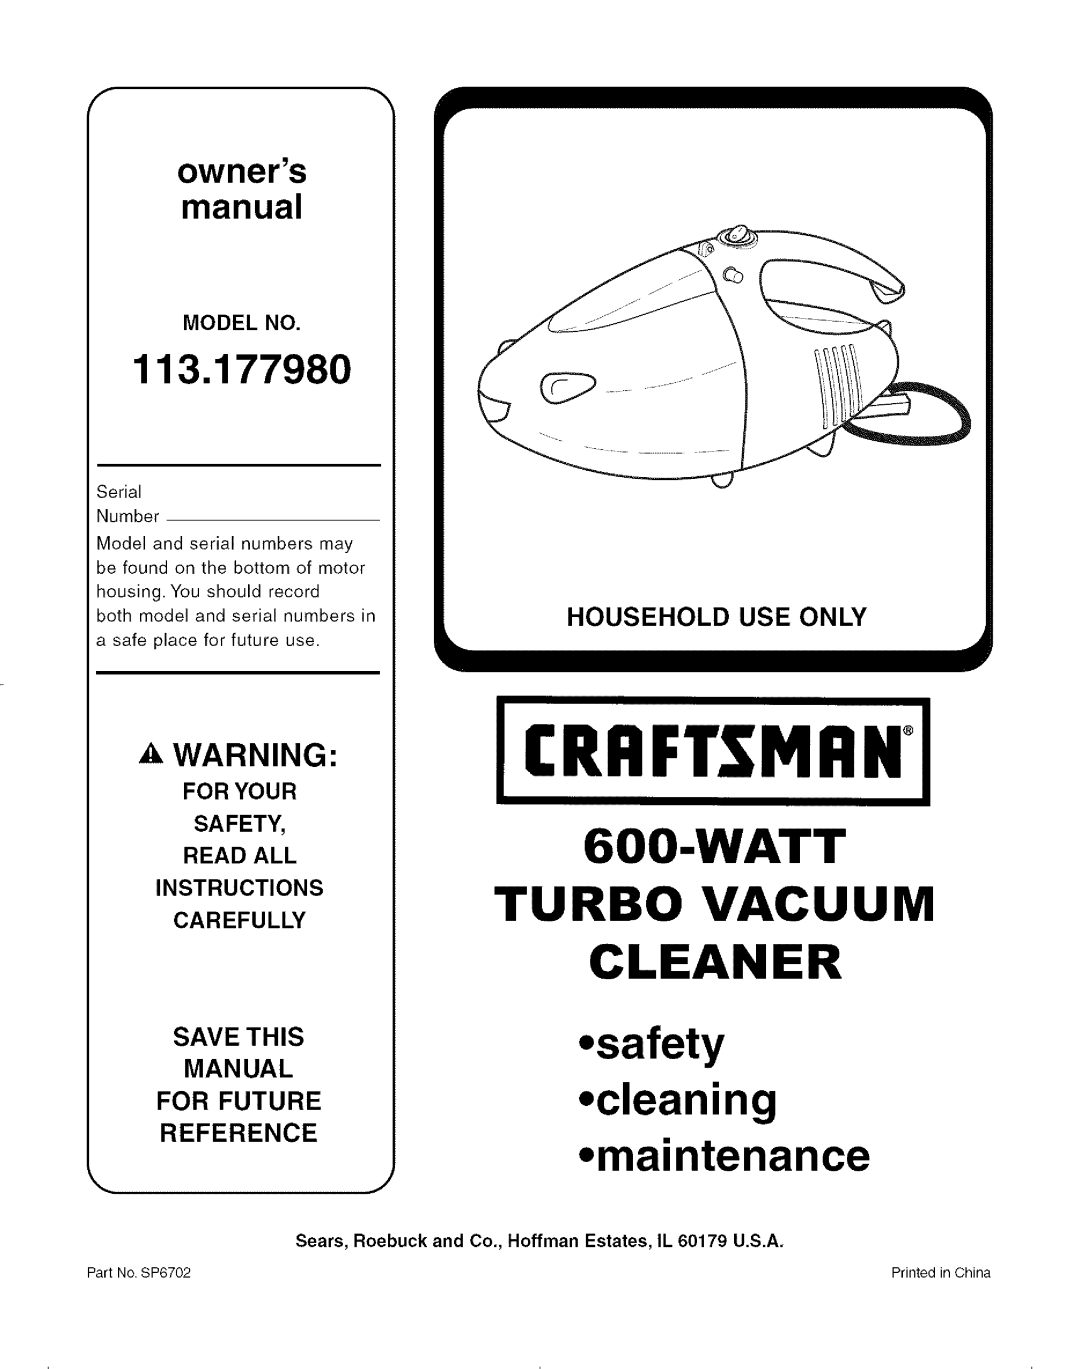 Craftsman 113.17798O owner manual CRHFT$1qHNo, Watt Turbo Vacuum Cleaner, A Warning, Household Use Only, owners manual 